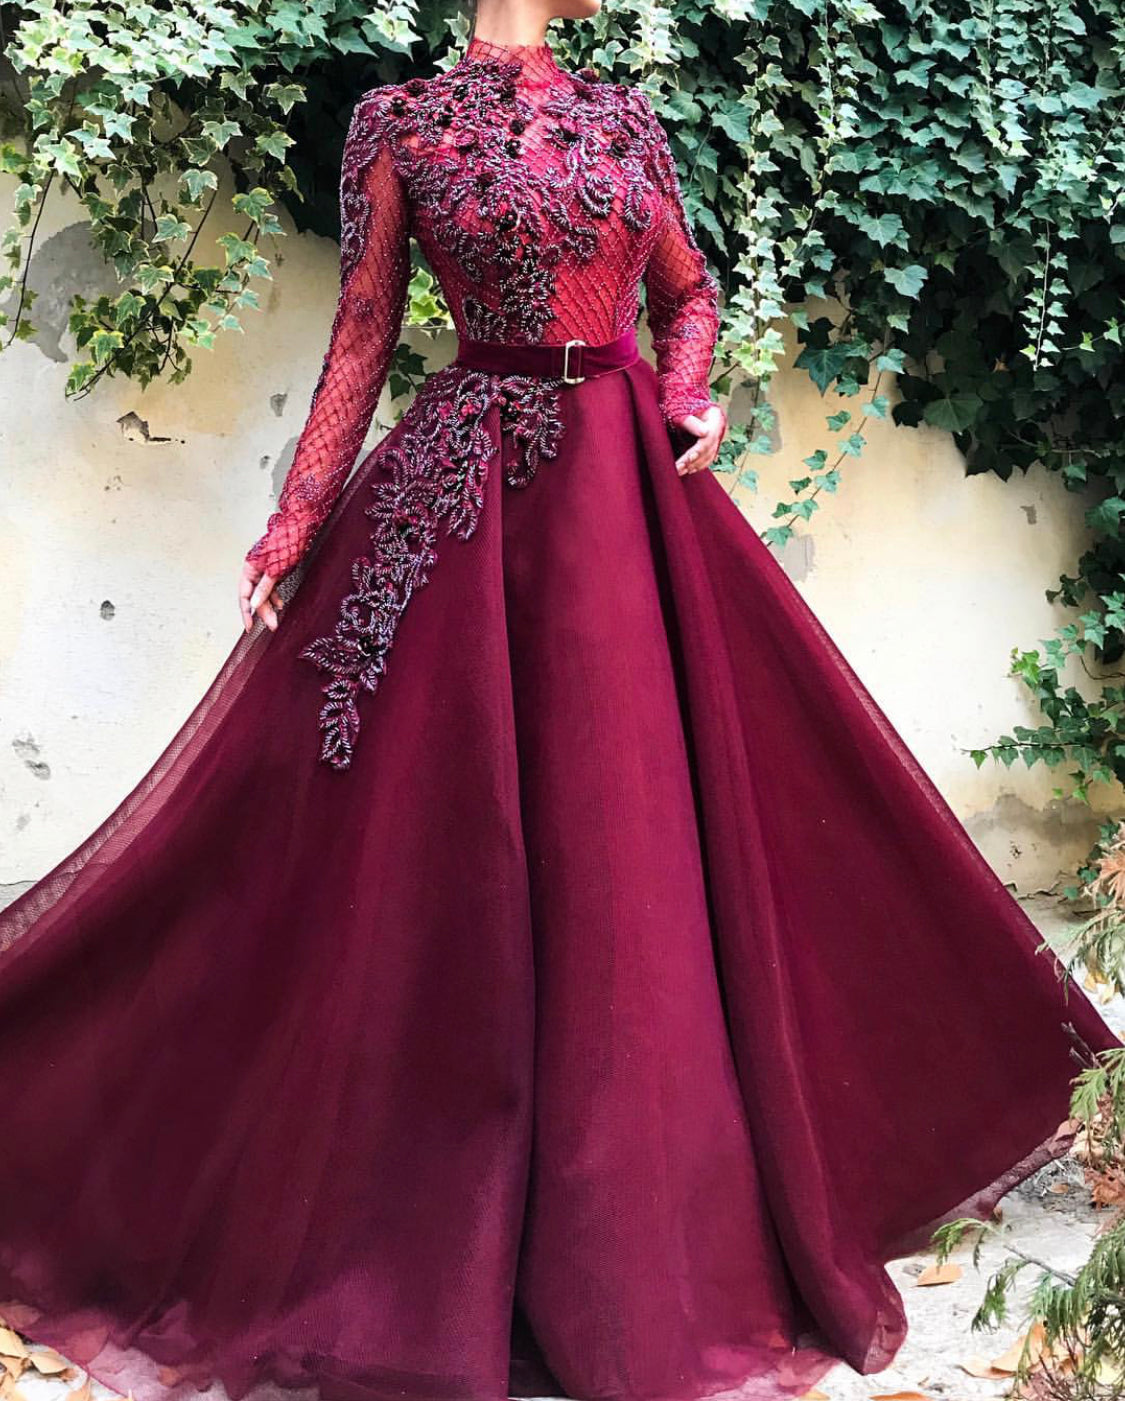 Red A-Line dress with long sleeves and embroidery